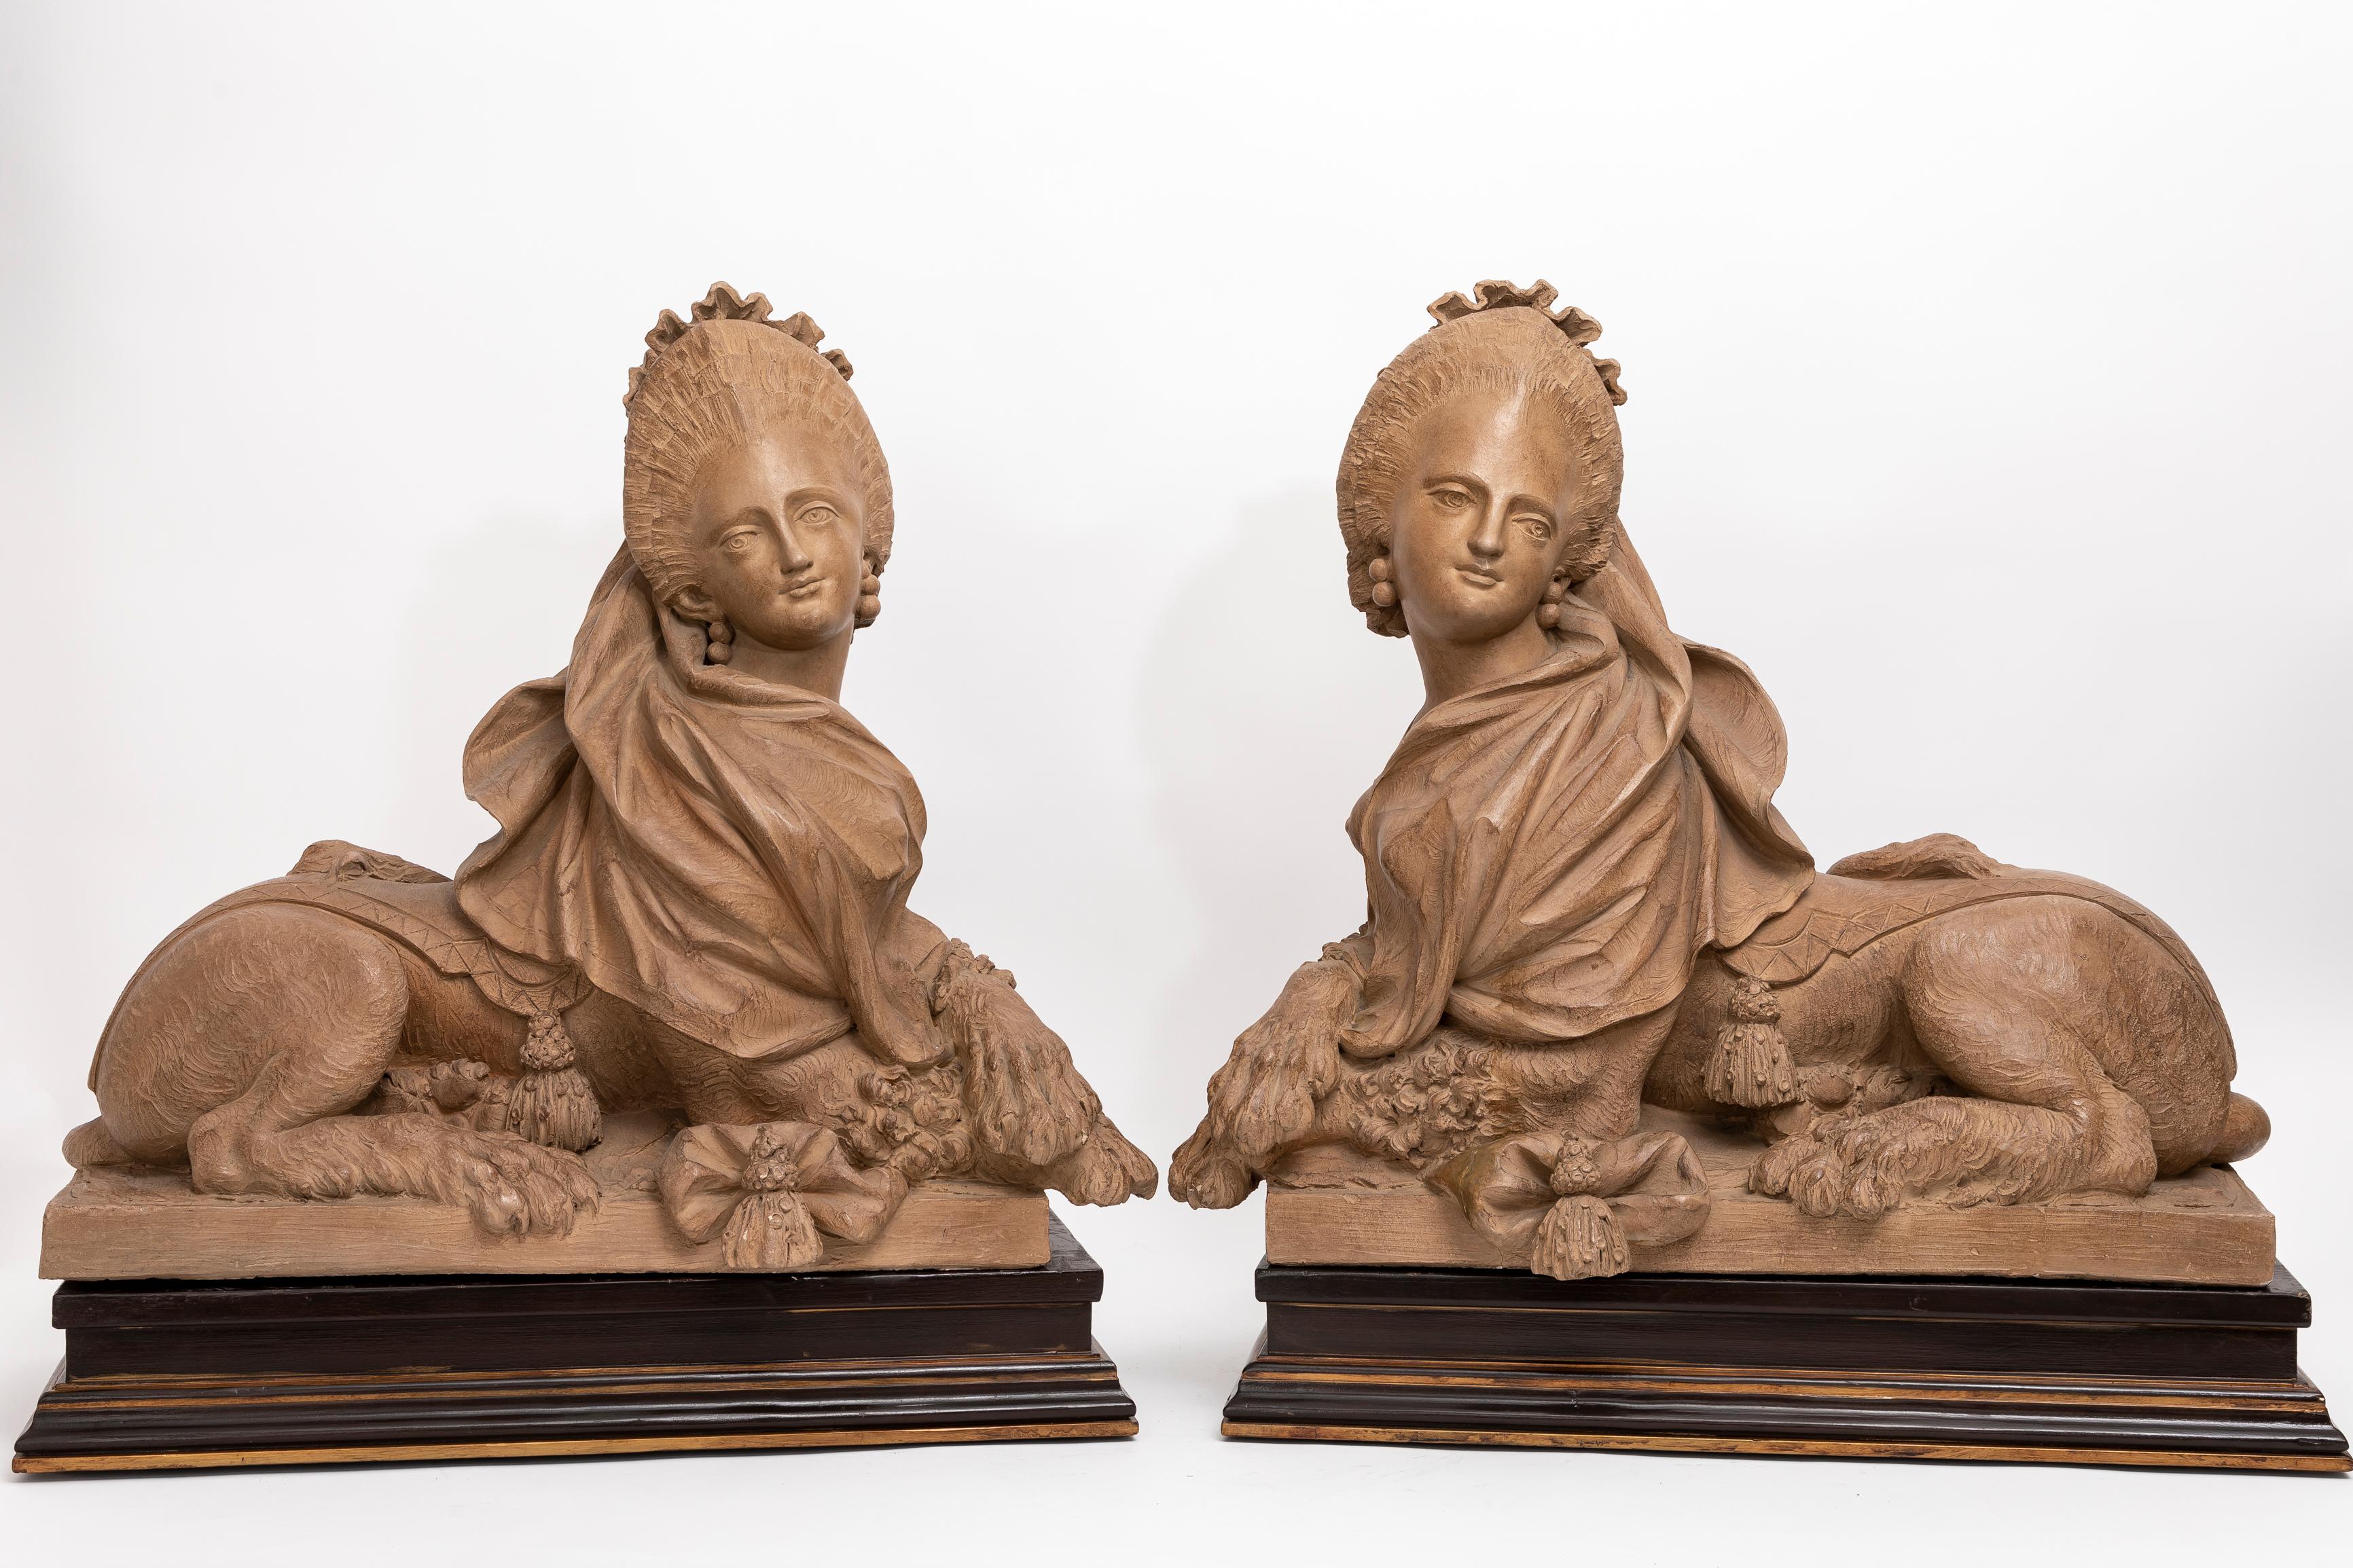 A Massive Pair of 19th Century French Terracotta Sculptures of Royal Sphynxes, raised on Wooden Bases.  Resting on wooden bases, these impressive, superb-quality sphinxes epitomize the essence of the best quality of terracotta. Crafted with